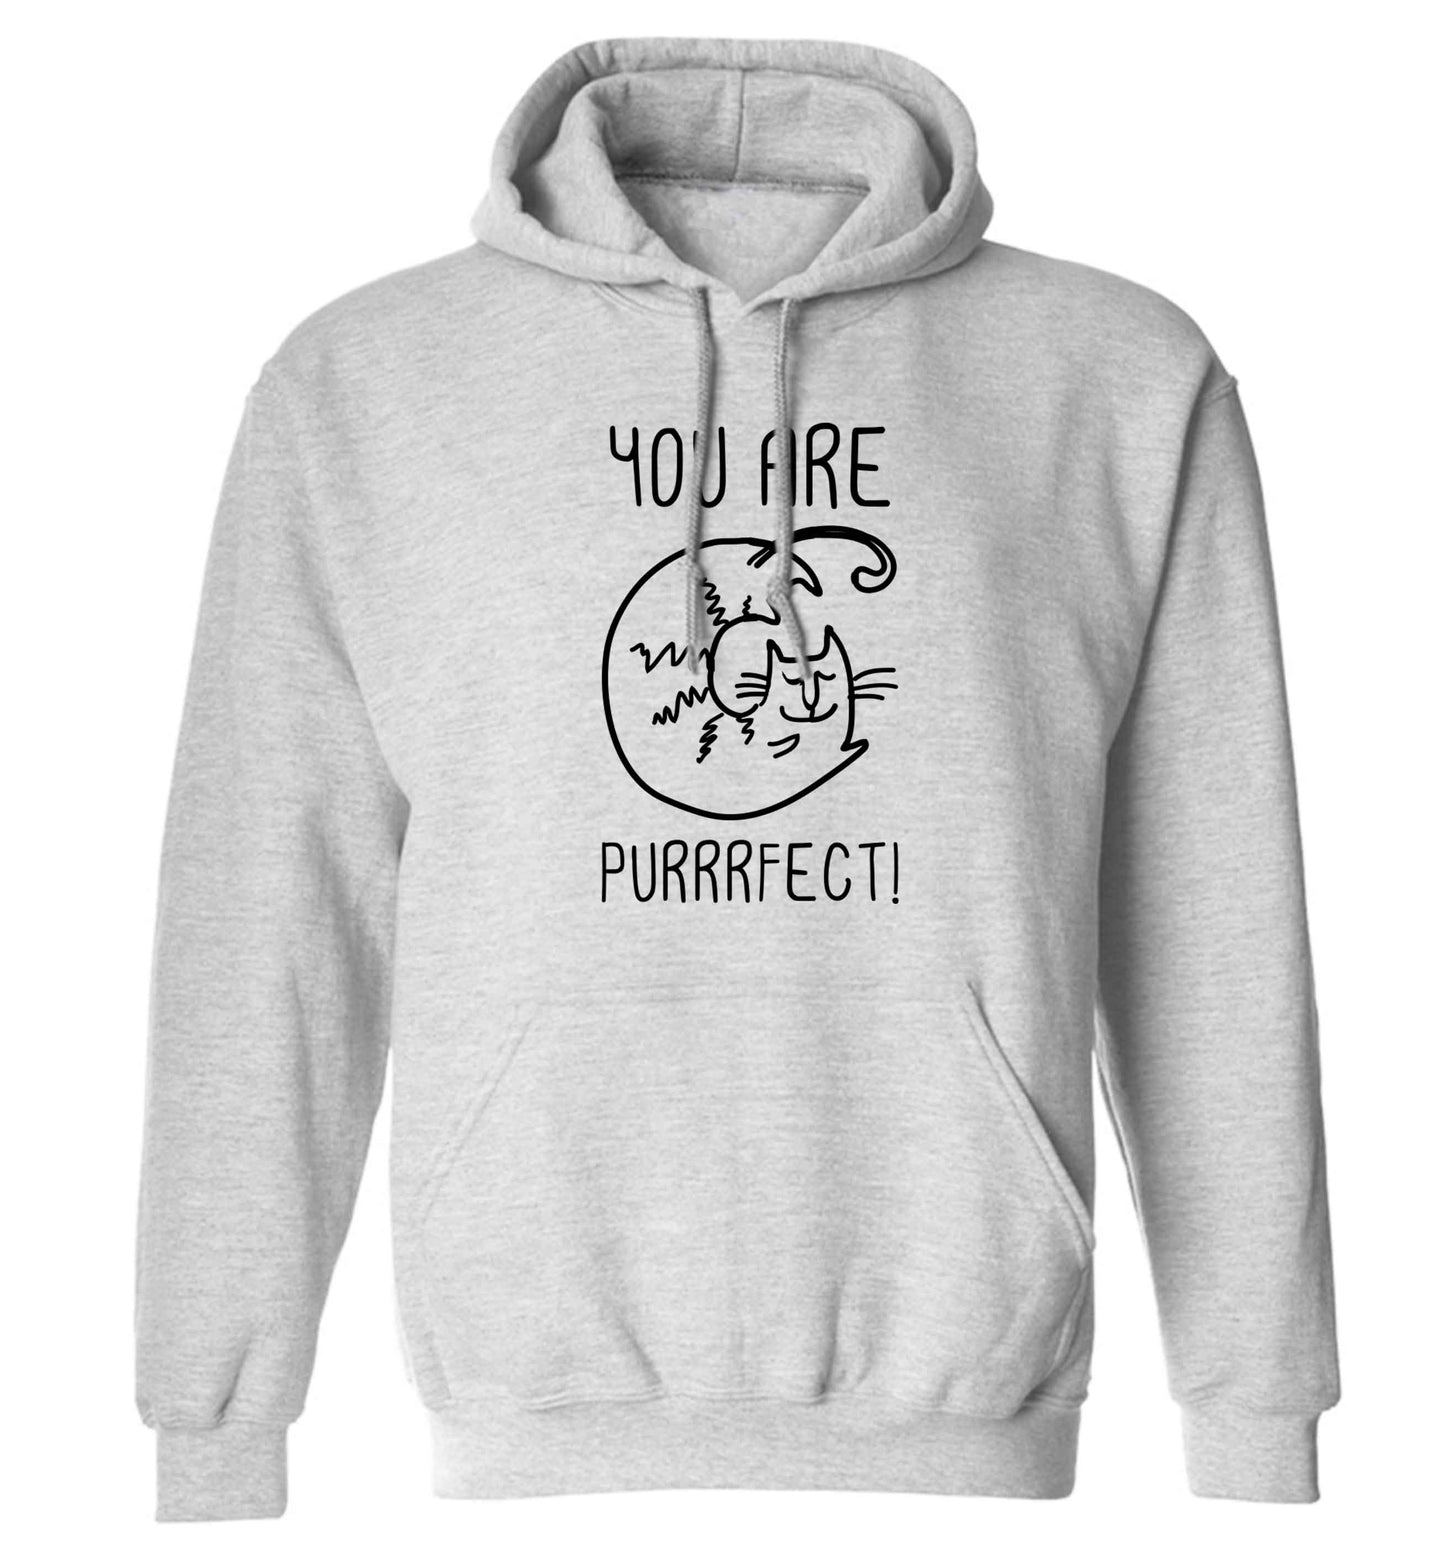 You are purrfect adults unisex grey hoodie 2XL